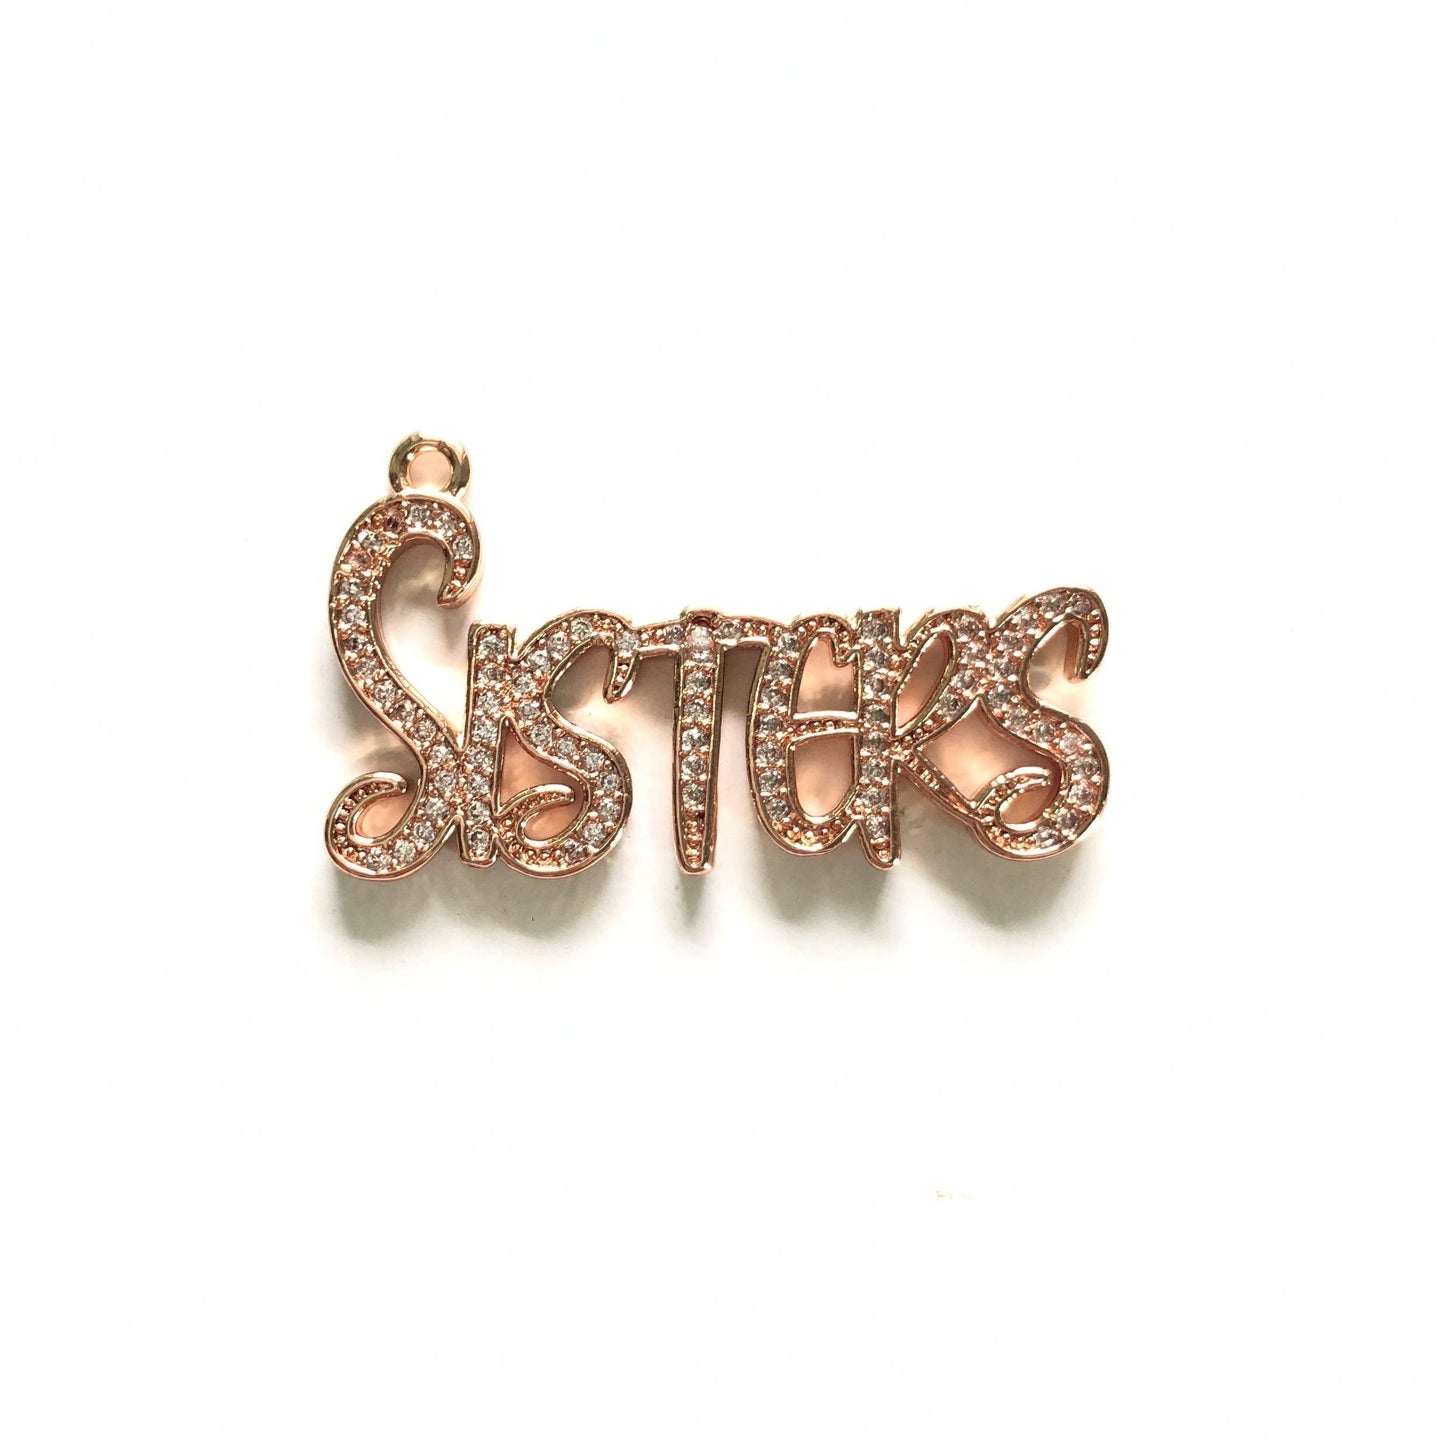 10pcs/lot 34.5*20mm CZ Paved Sisters Charms Rose Gold CZ Paved Charms Words & Quotes Charms Beads Beyond